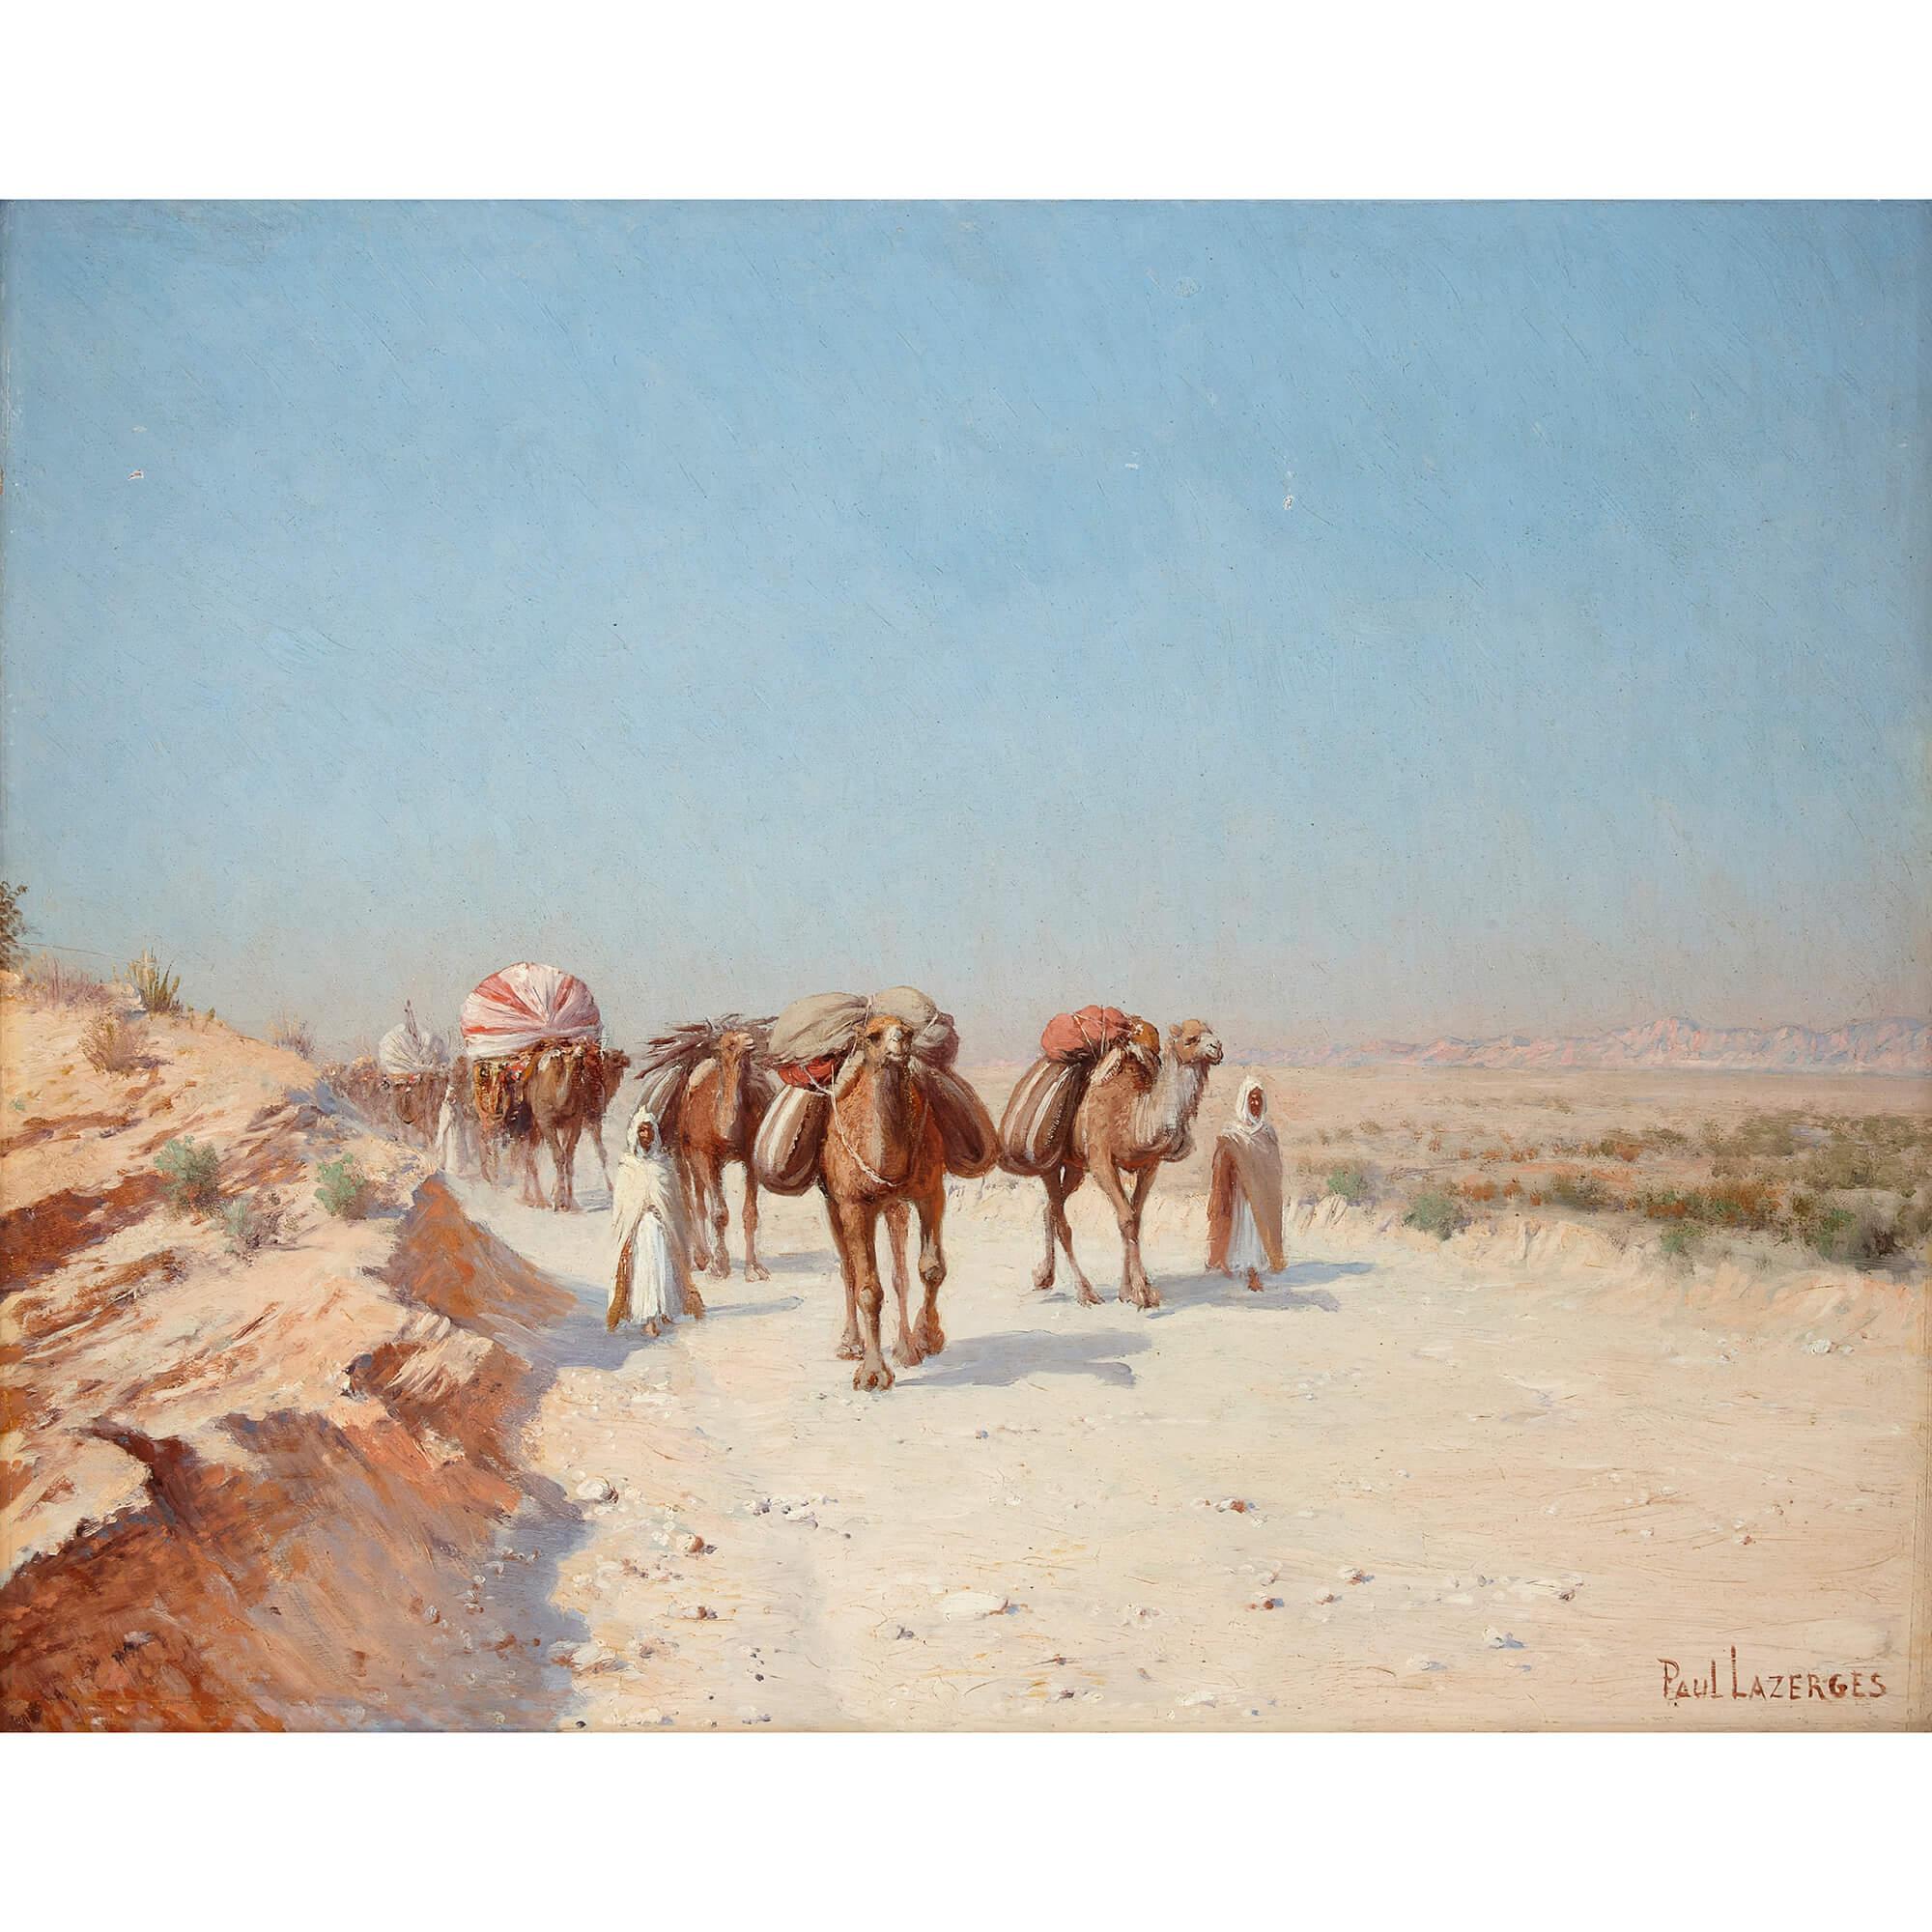 Orientalist landscape with camels oil painting by Lazerges
French, Late 19th Century
Panel:  Height 33cm, width 41cm
Frame:  Height 62cm, width 70cm, depth 10cm 

This painting, titled ‘Desert Caravan’, is an oil-on-panel creation by the illustrious